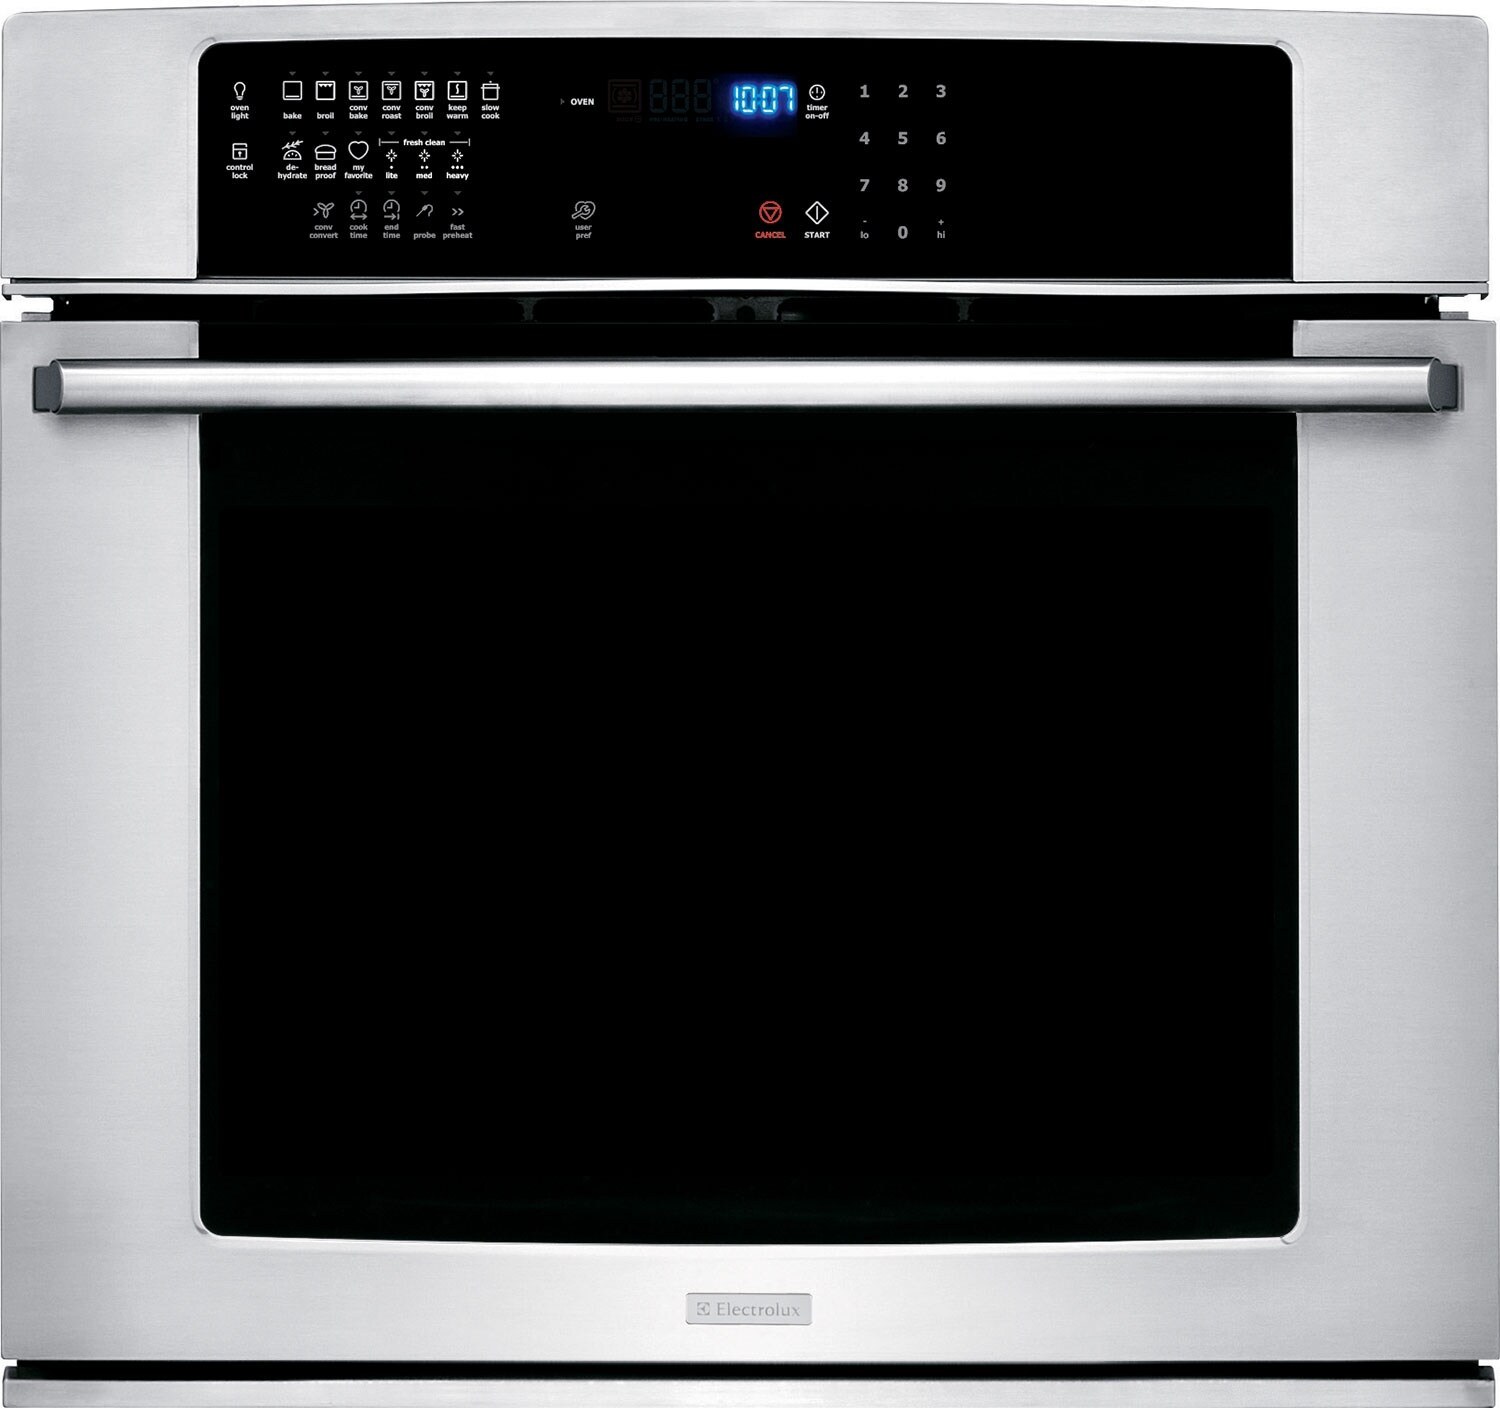 Can you buy Electrolux appliances in Canada?